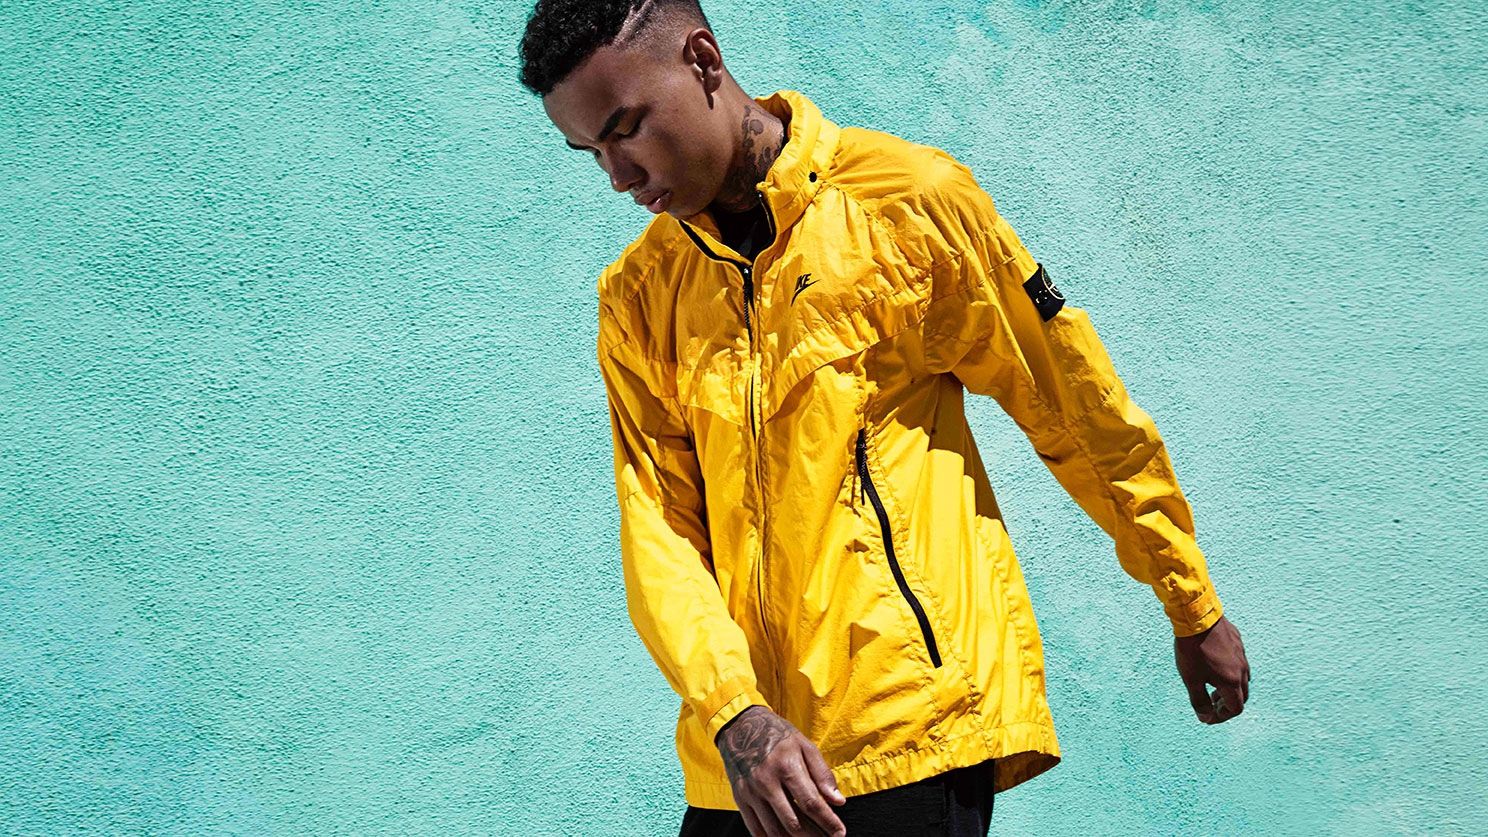 Regeneratief bout spion NikeLab x Stone Island launch the new Windrunner - Today, at NikeLab's new  store opening